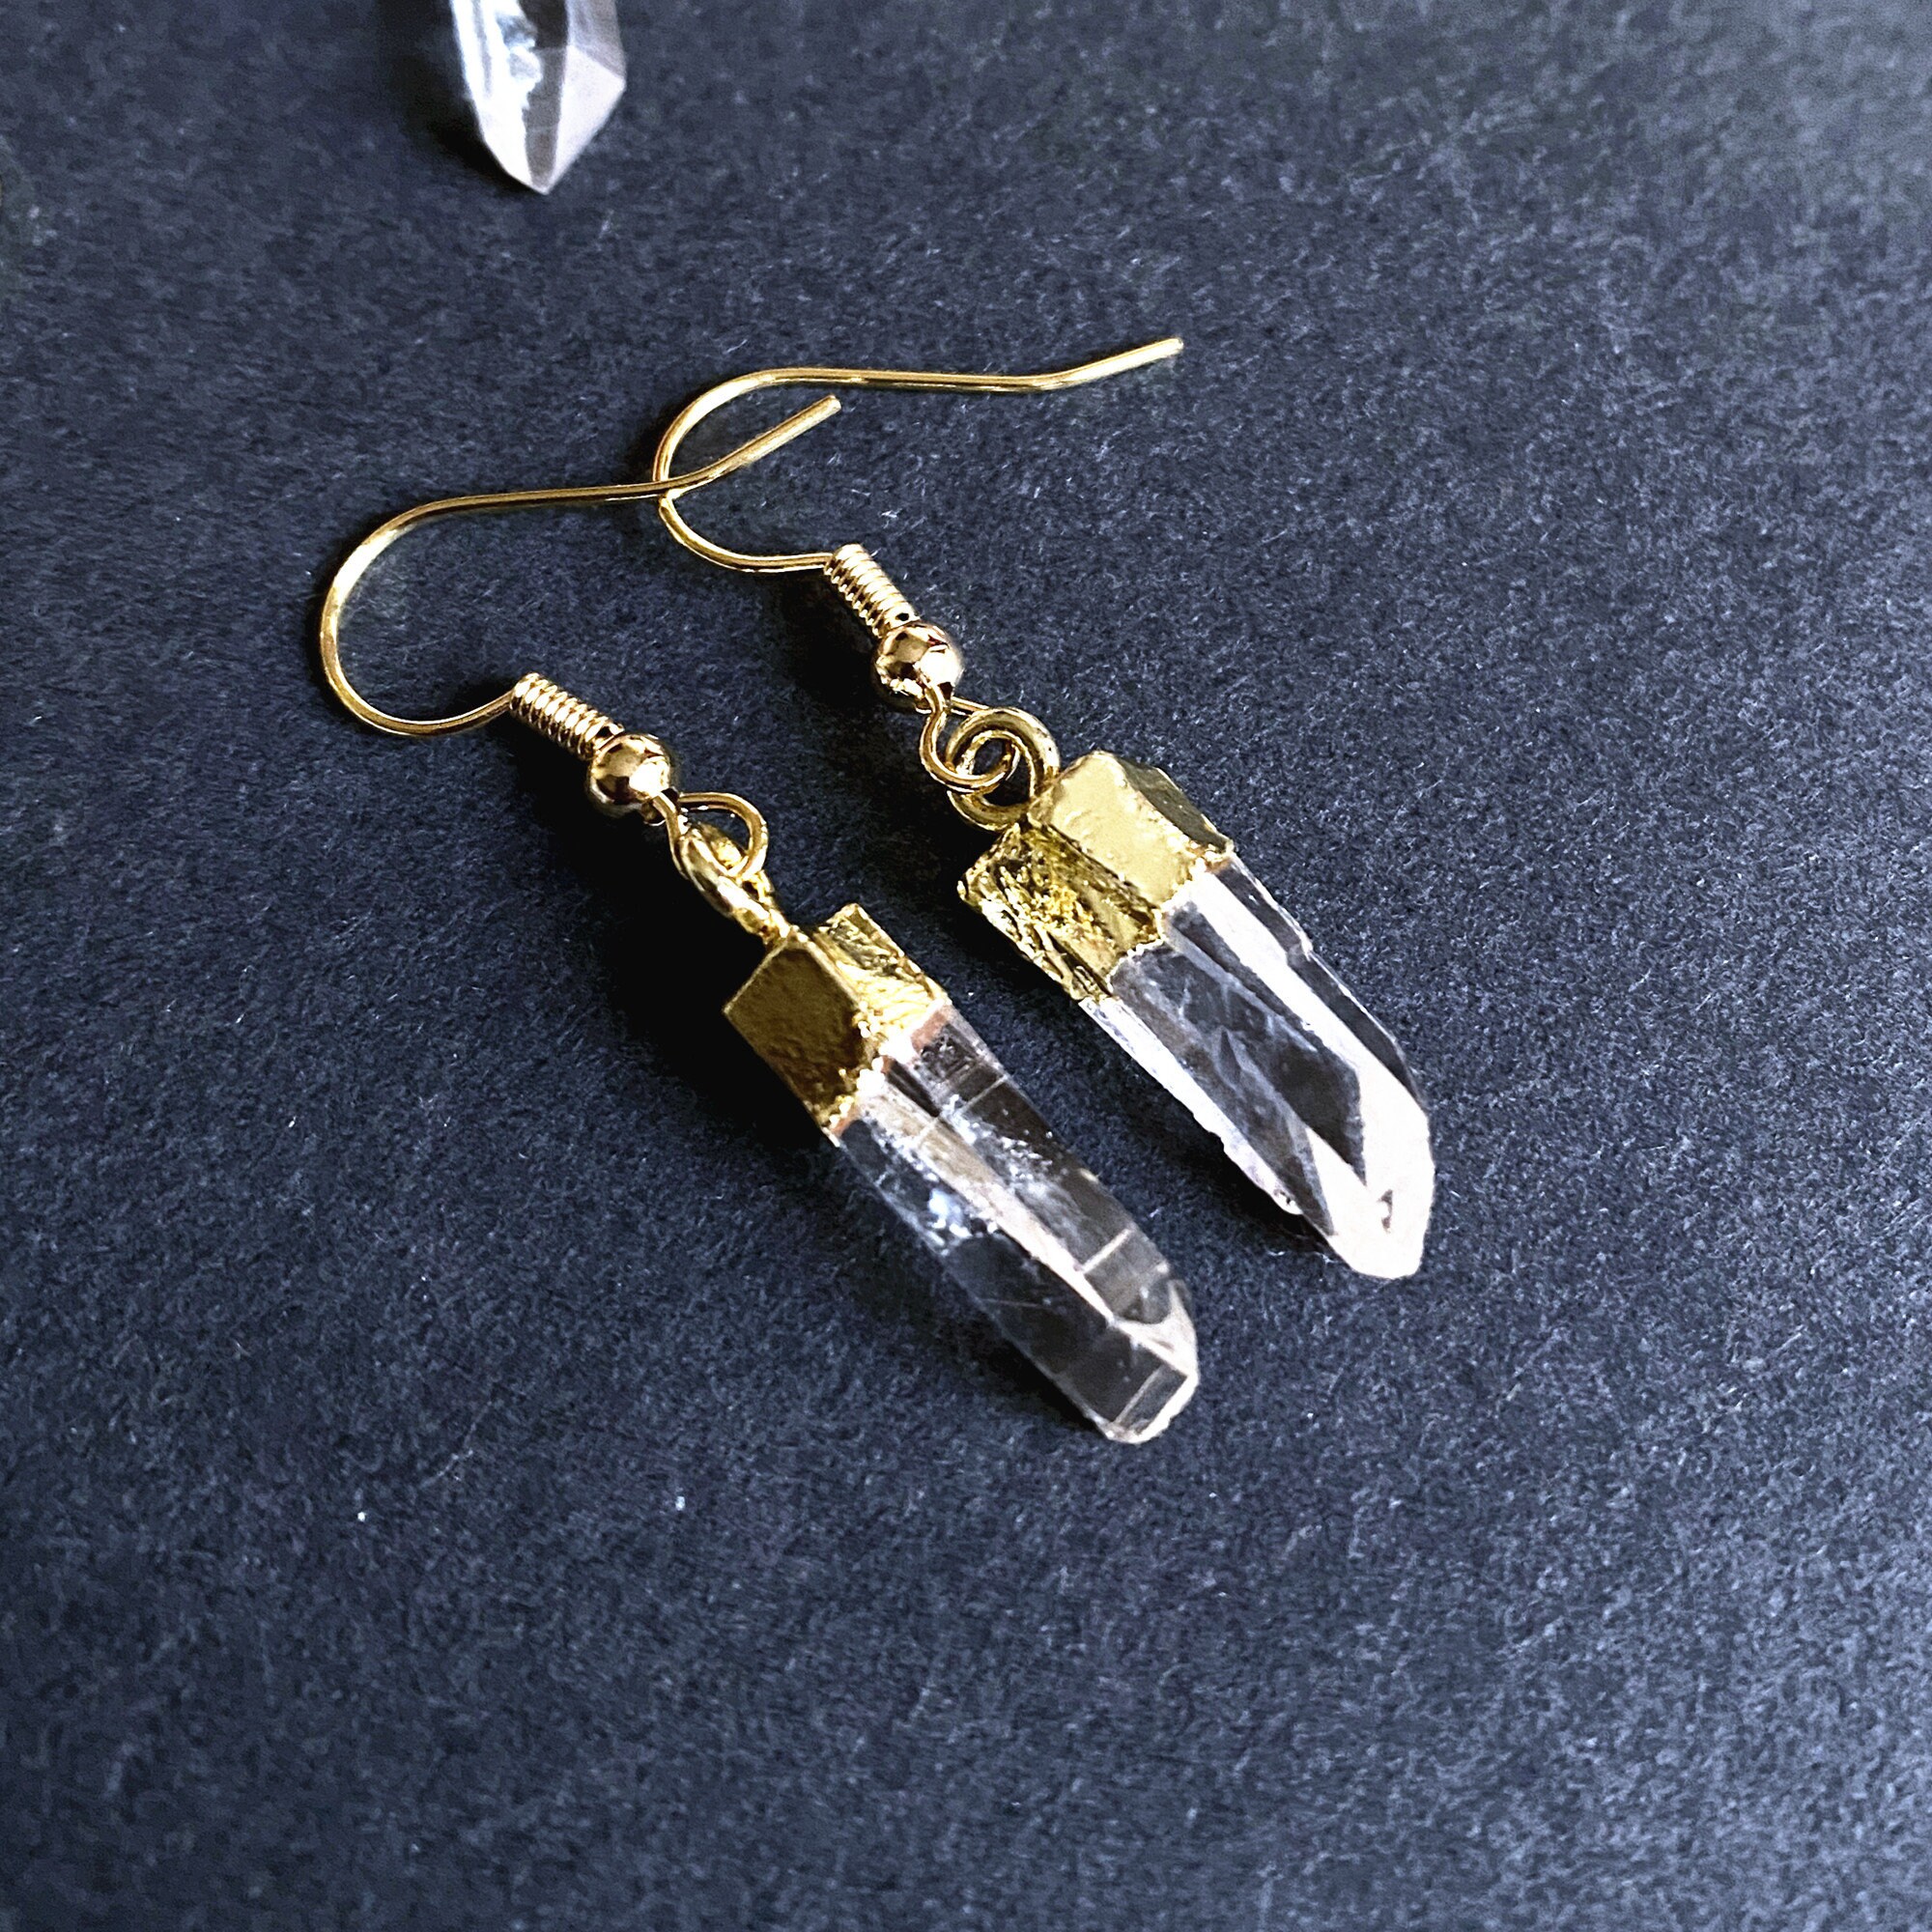 New Arrival Slender Rock Crystal Quartz Point Earrings With Etsy